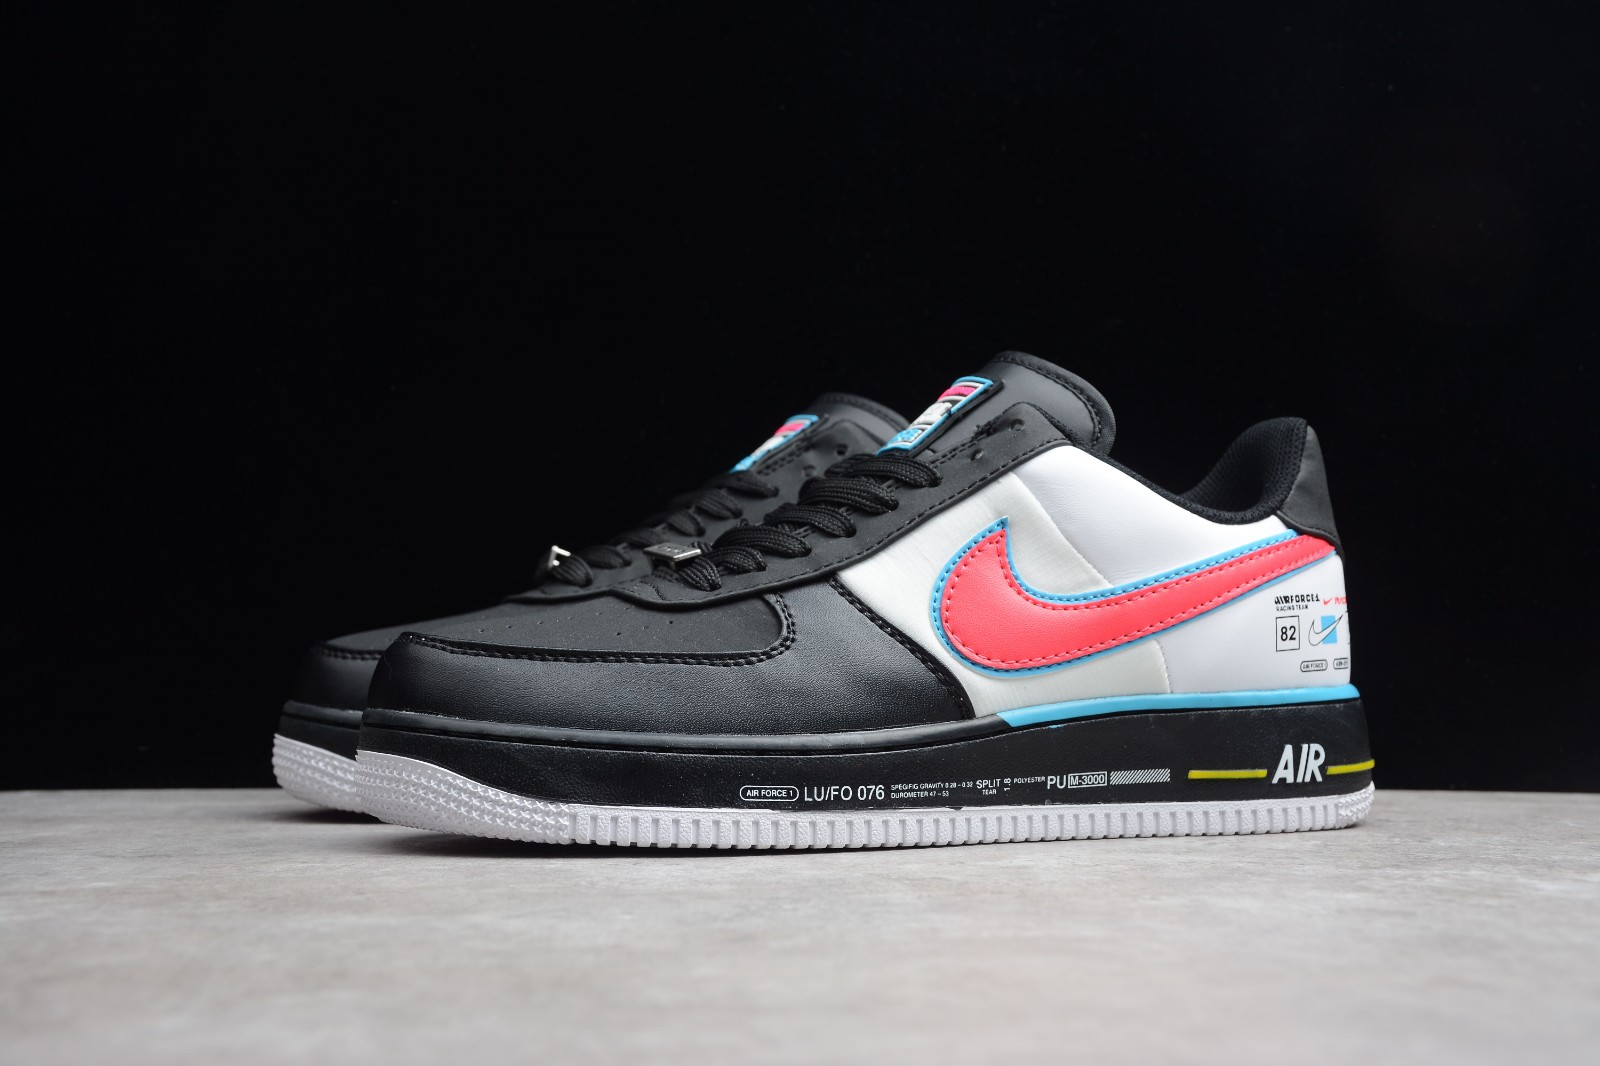 Nike Air Force 1 Low Racing Black White Racer Blue Red AH8462 - 004 StclaircomoShops - nike air force max barkley 2 hyperfuse price list